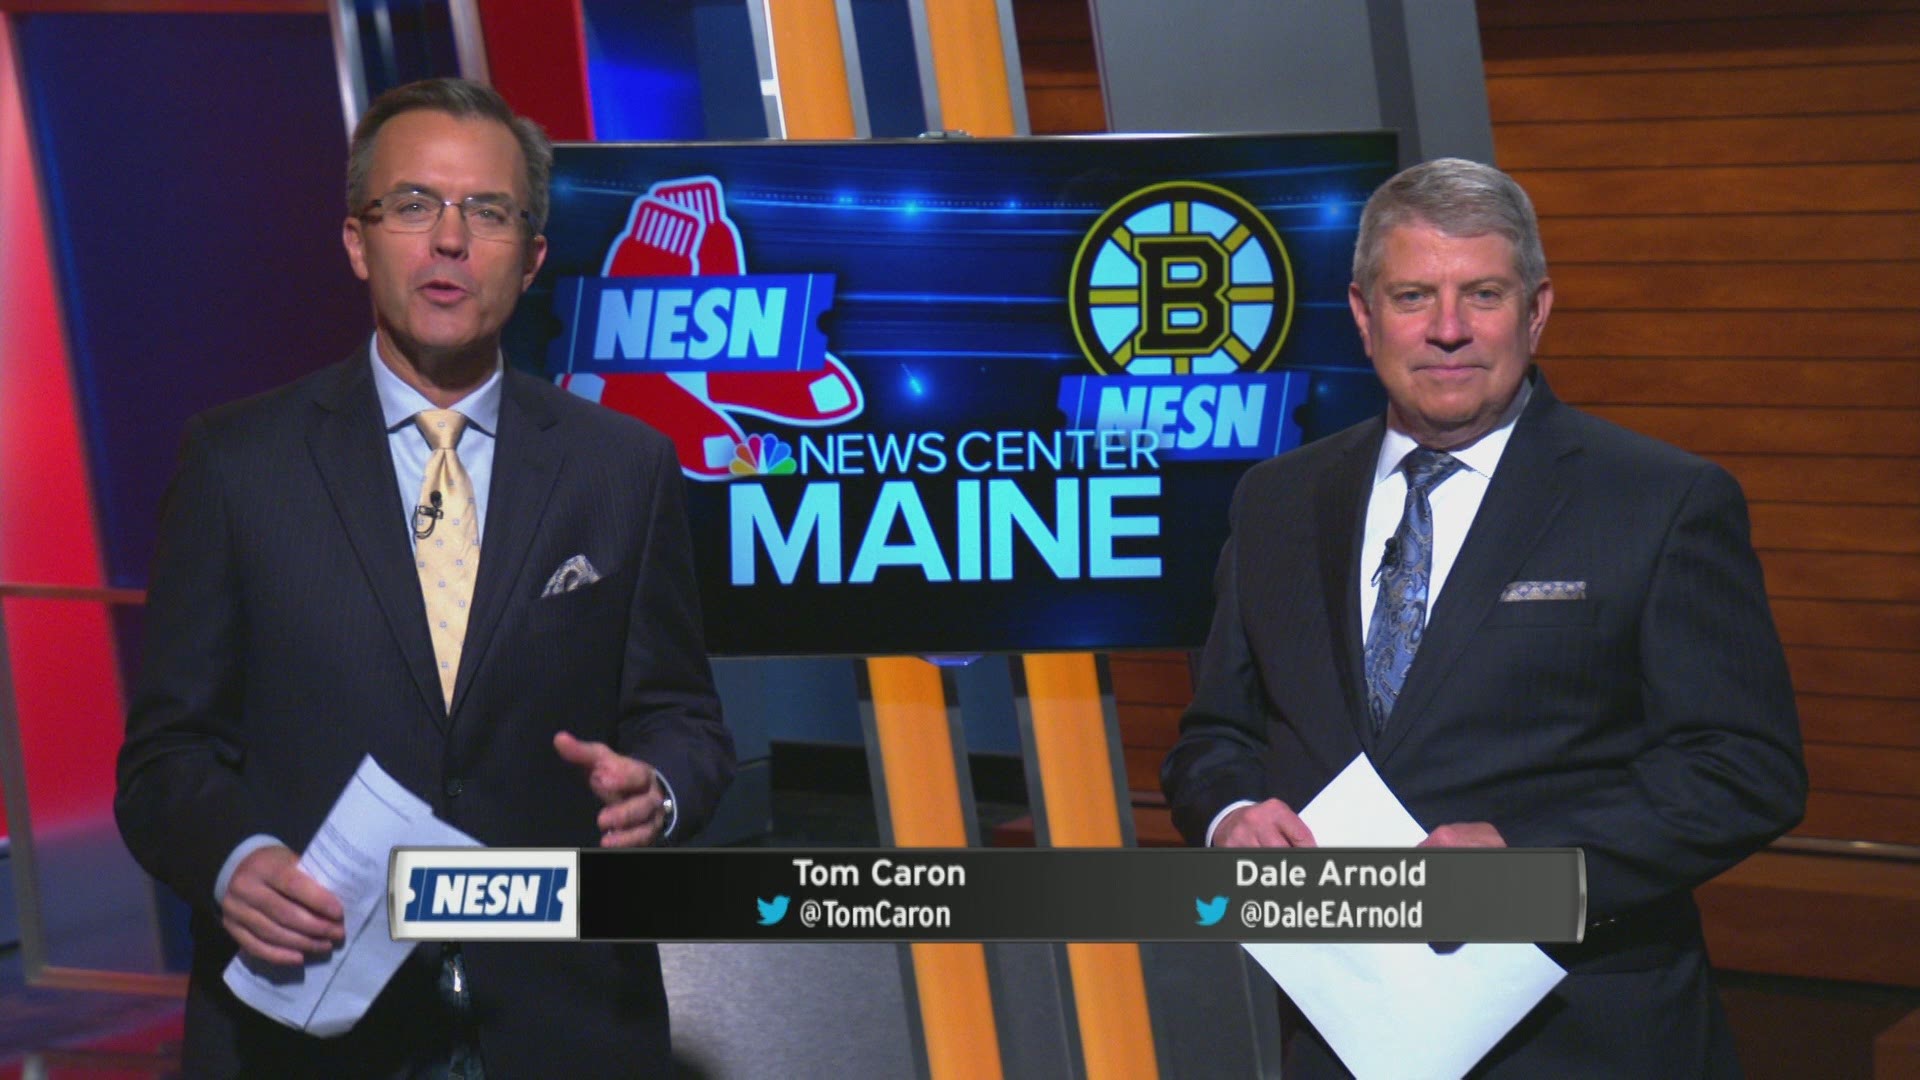 NESN partnership announcement with NEWS CENTER Maine.